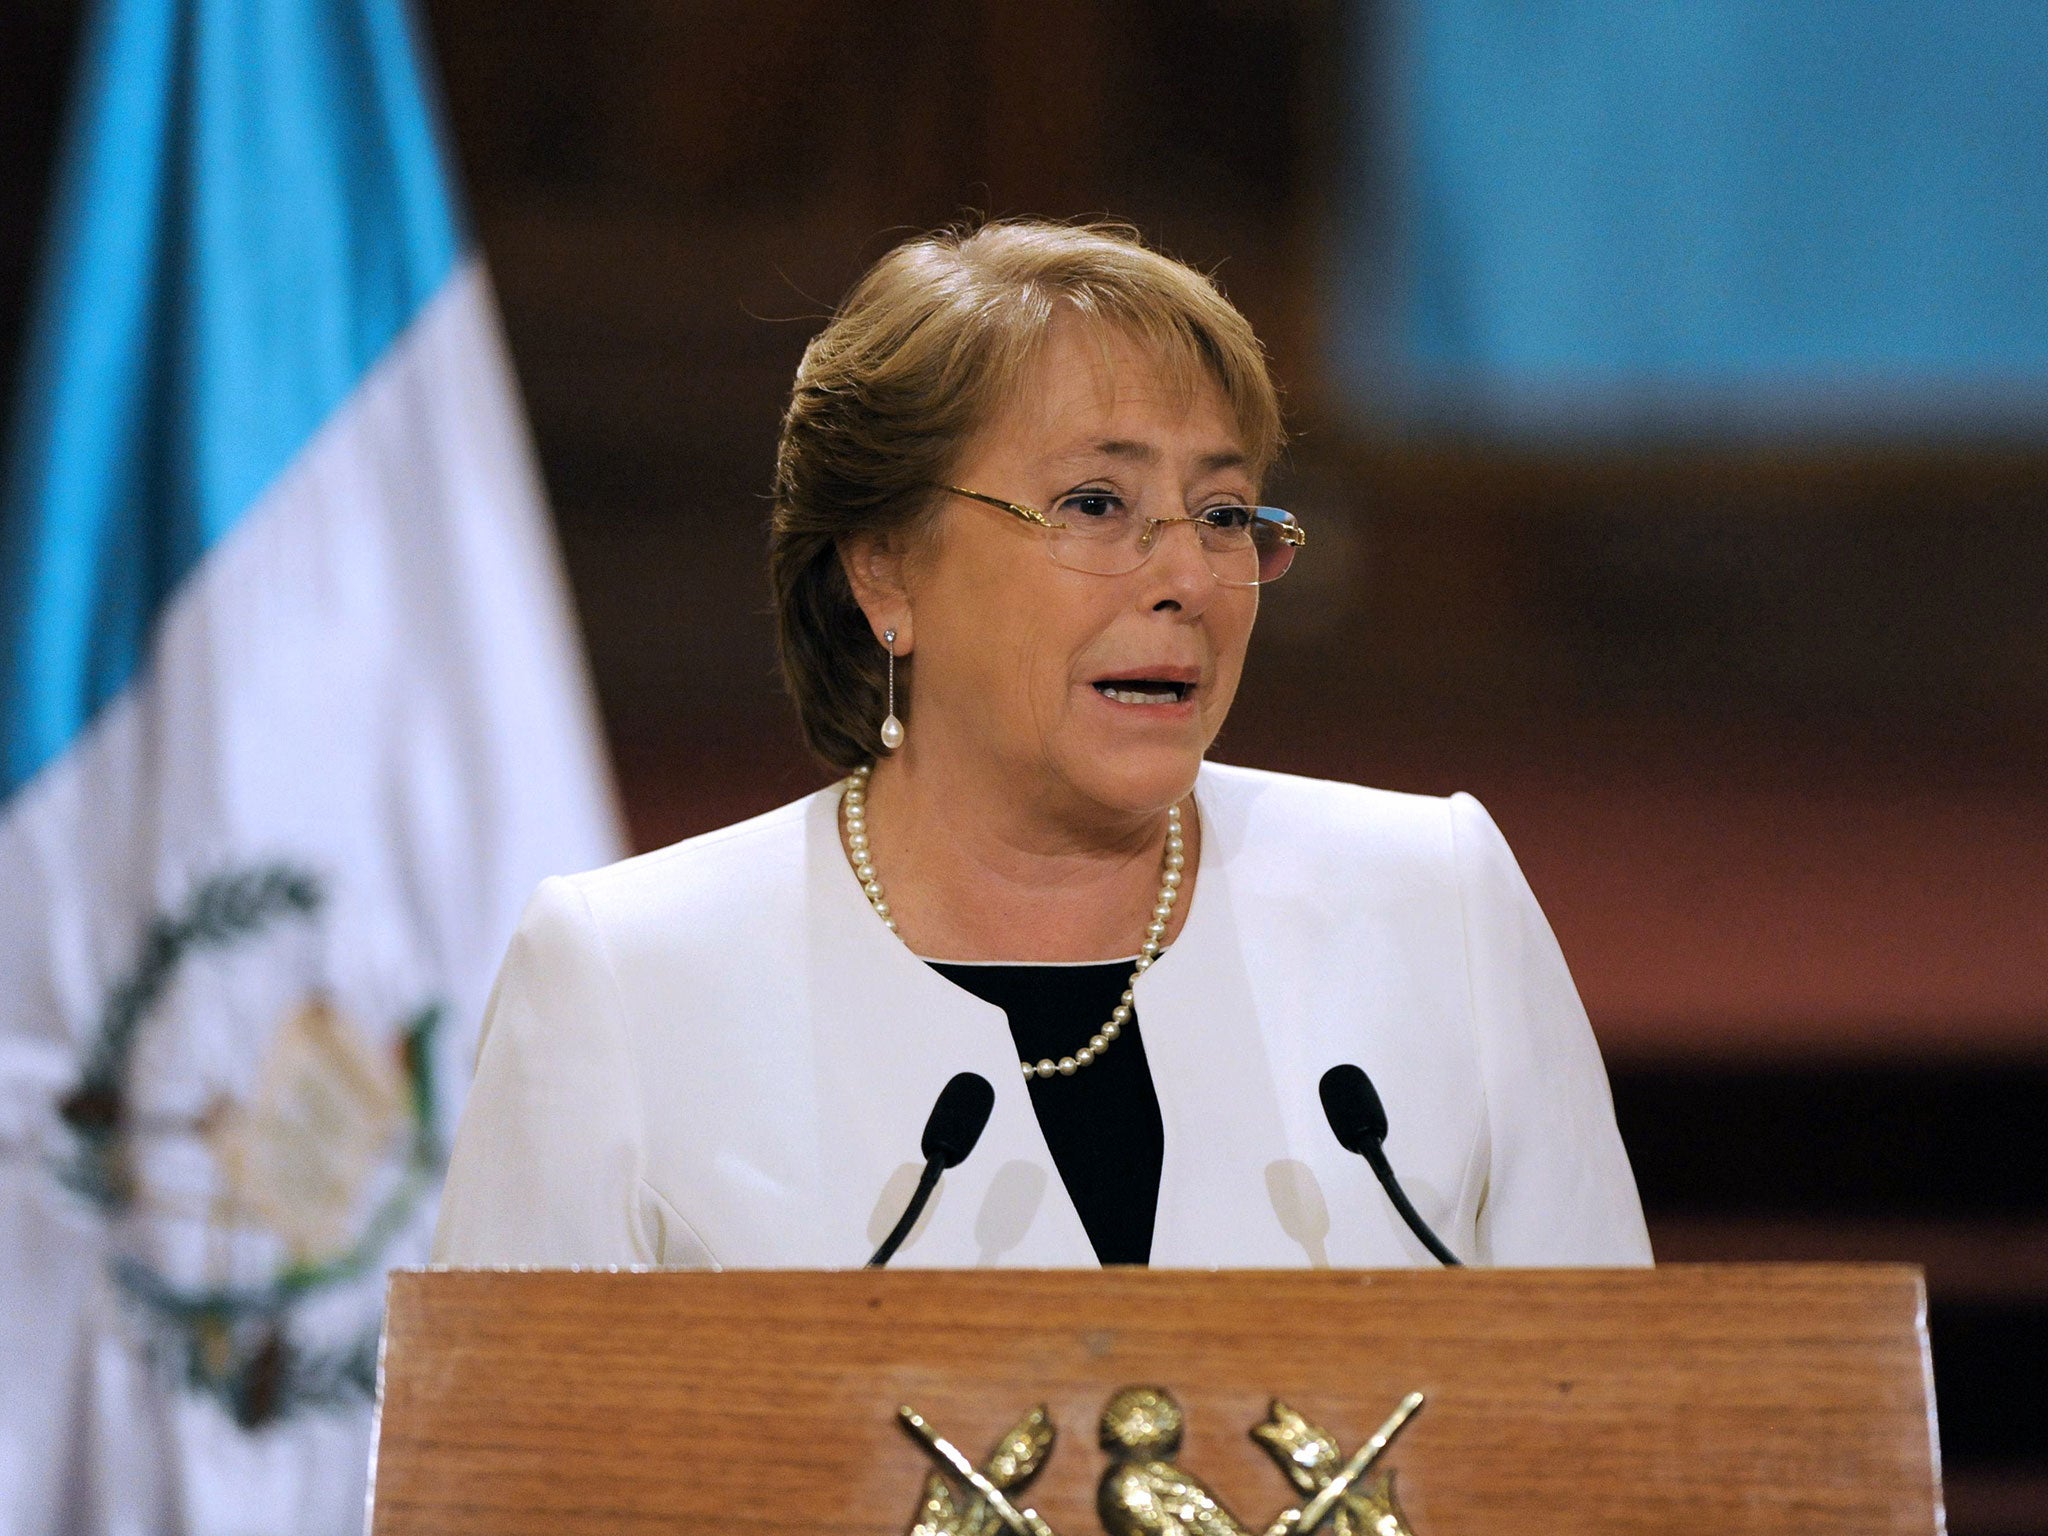 She made the appeal to Chilean President Michelle Bachelet